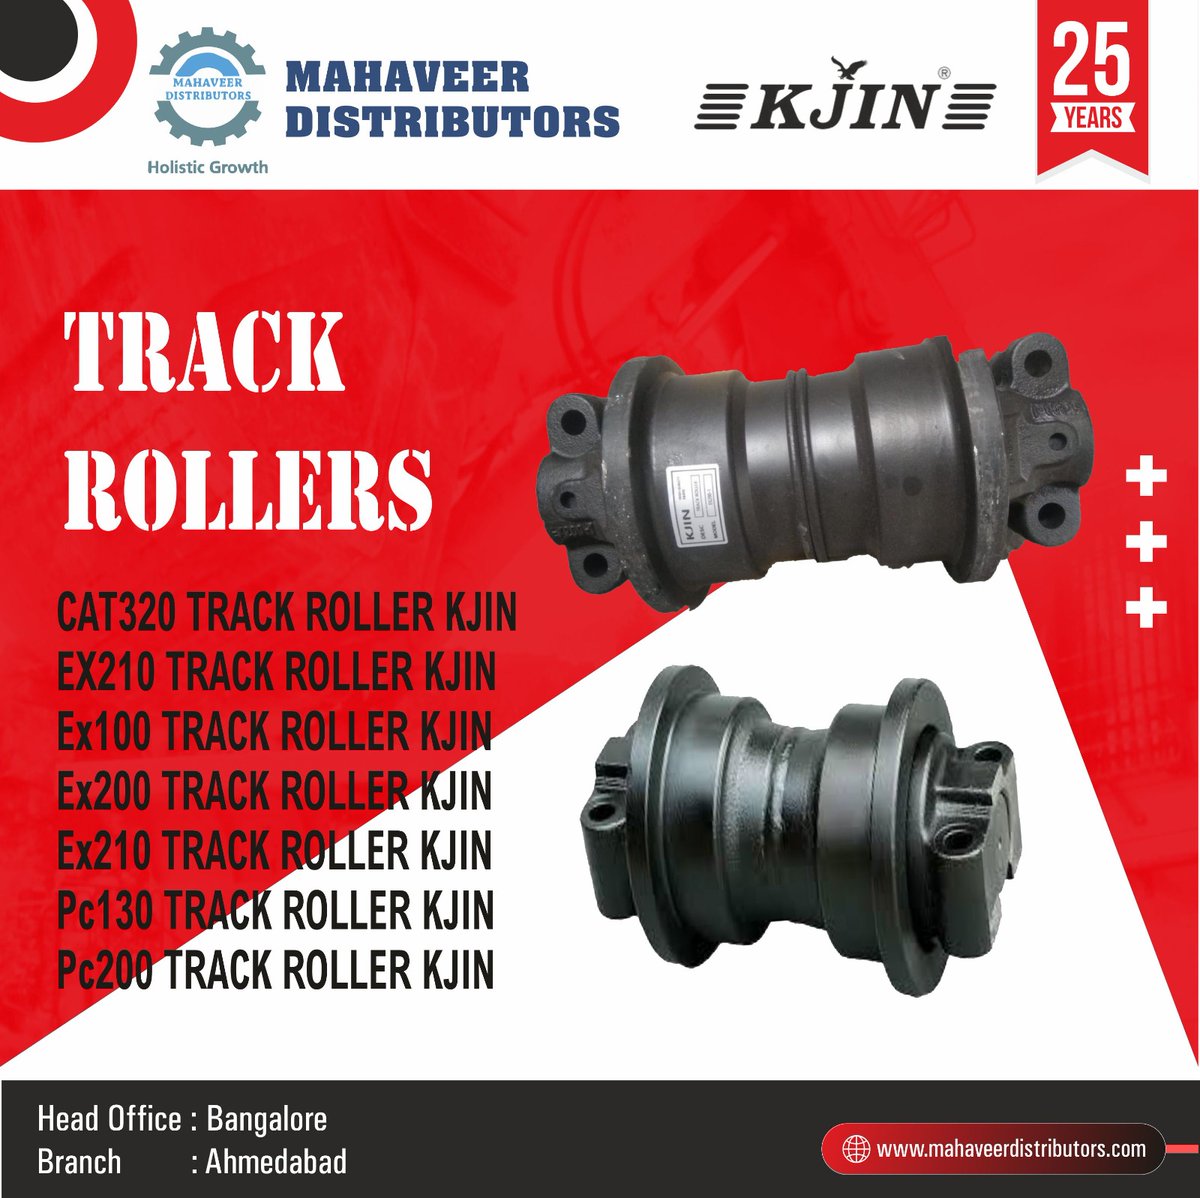 All types of Track Rollers are available here at the best price!!!

Order & Inquiry and reach us☎️ 9686495522 mahaveerdistributors.com

#ConstructionSupplies
#ExcavatorAccessories
#UndercarriageComponents
#IndustrialMachinery
#TrackSystem #trackroller #trackrollers #TrackPower